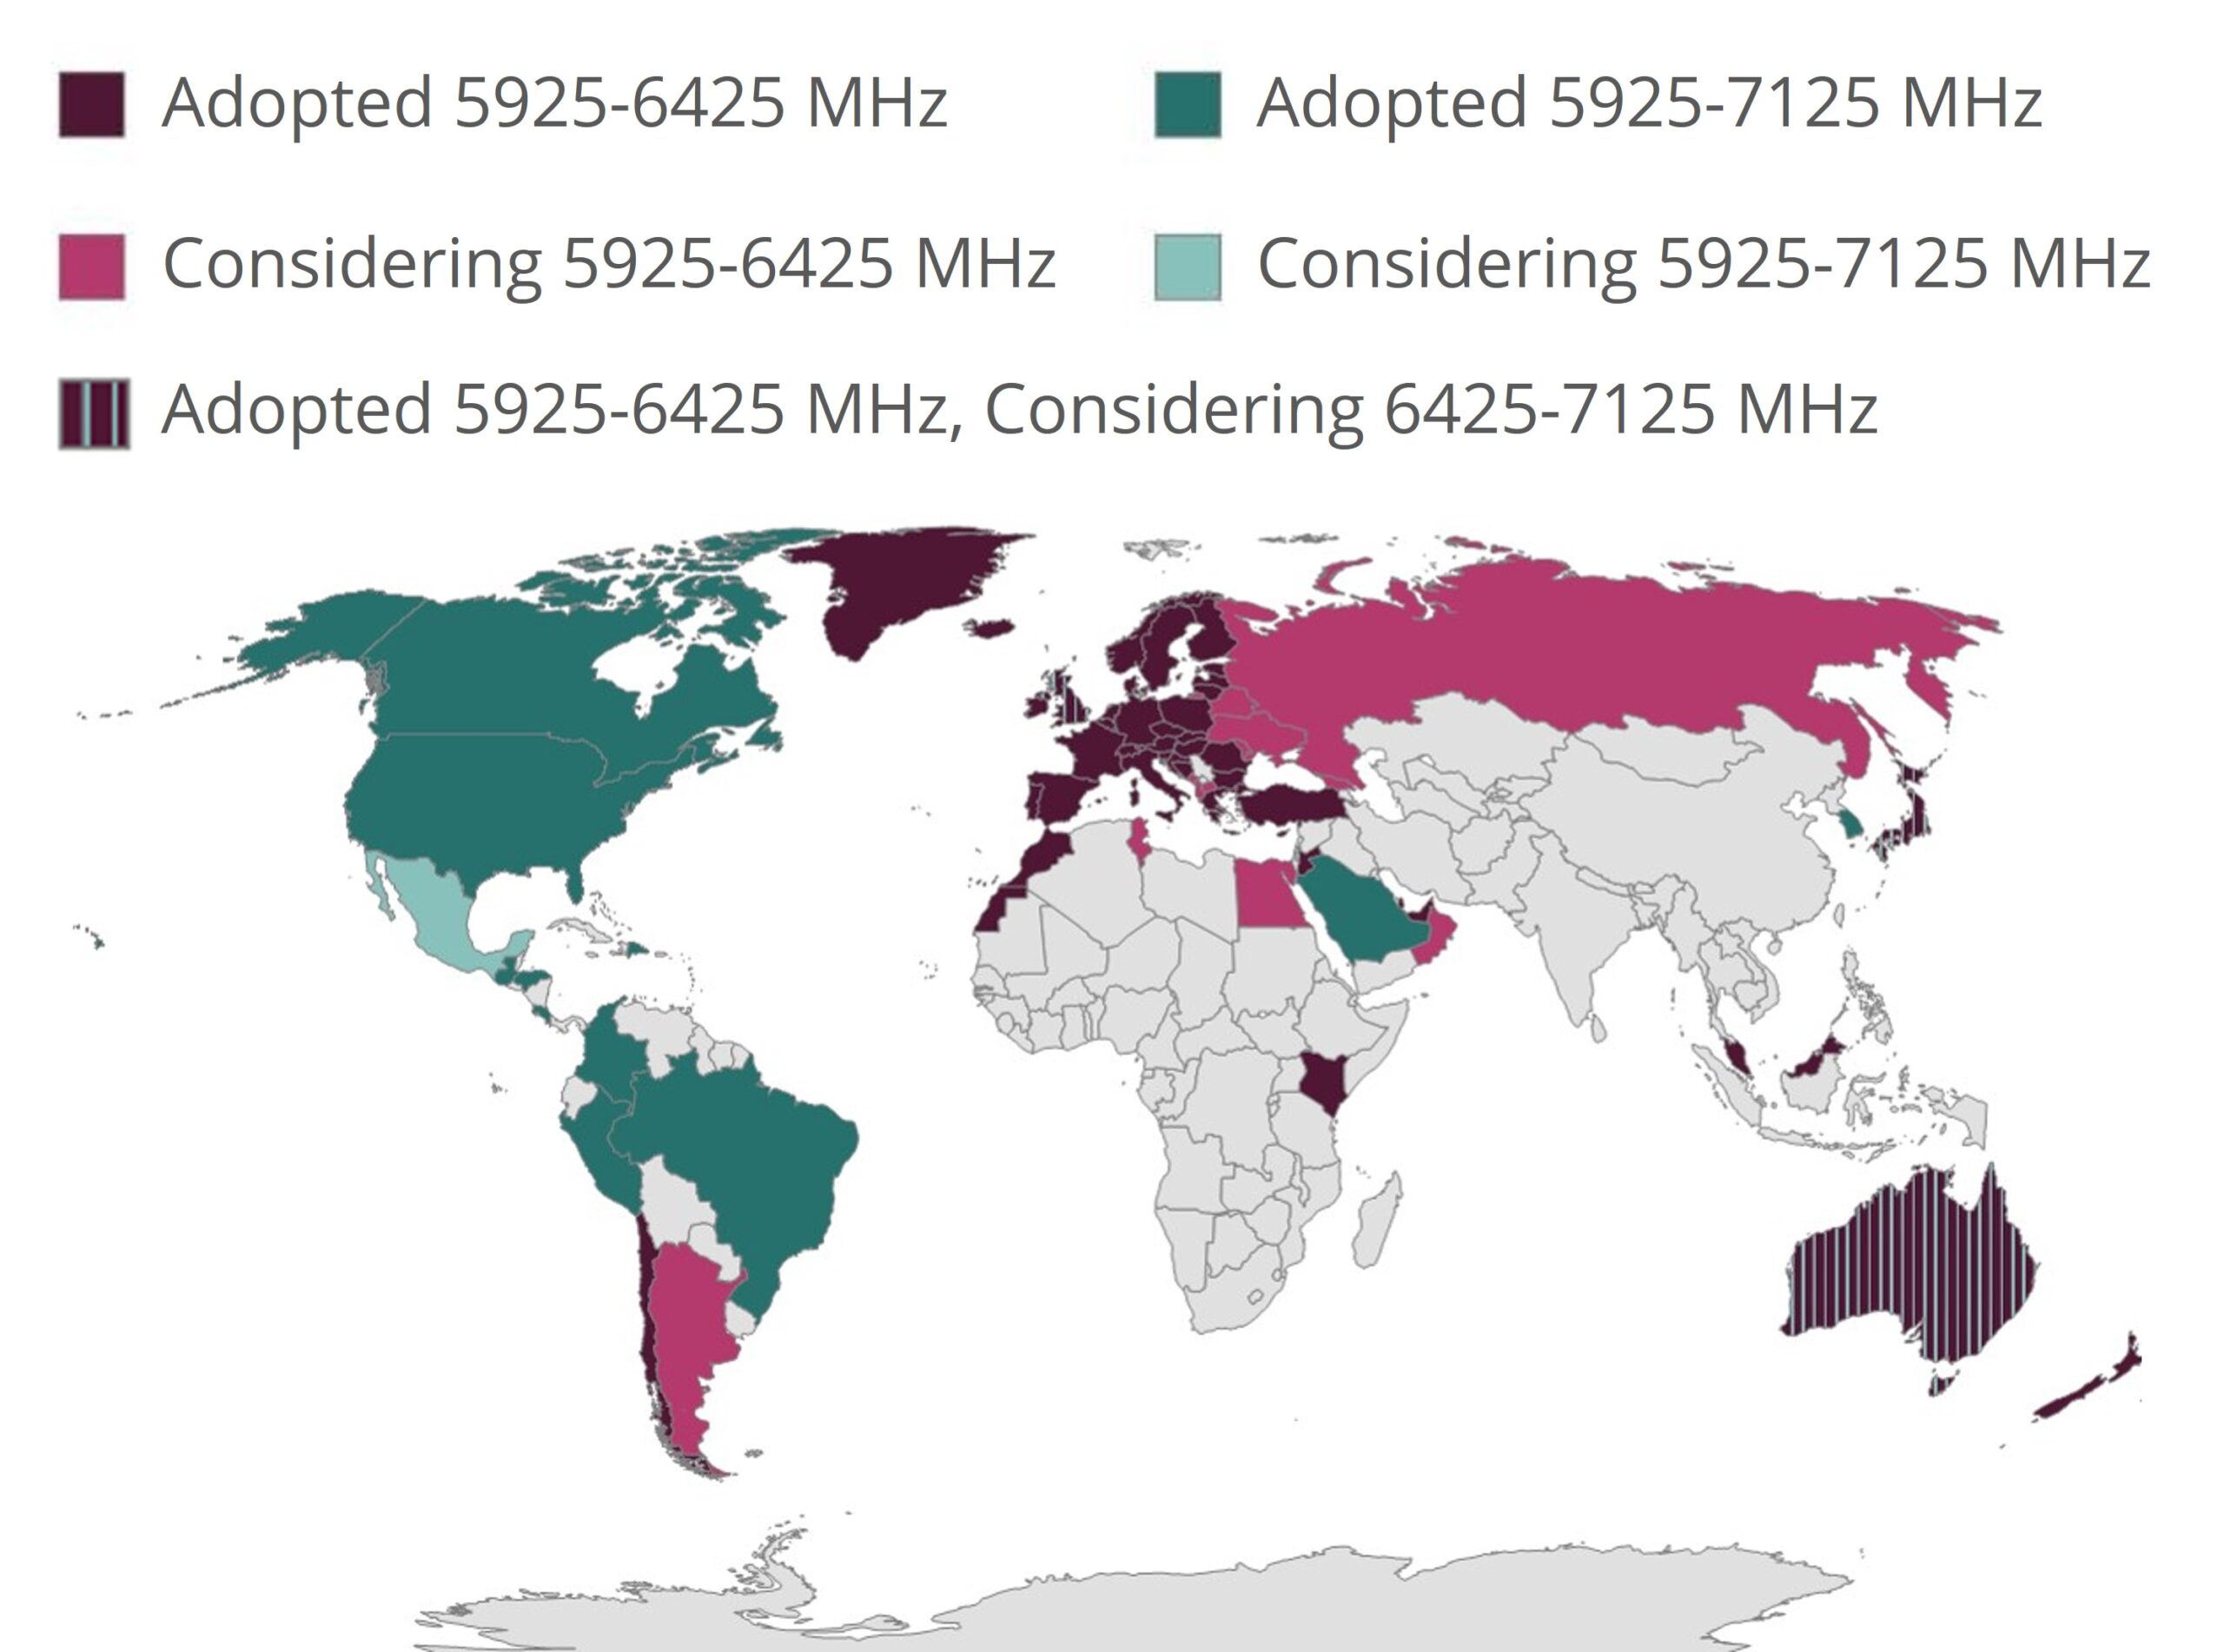 Countries enabling Wi-Fi in 6GHz